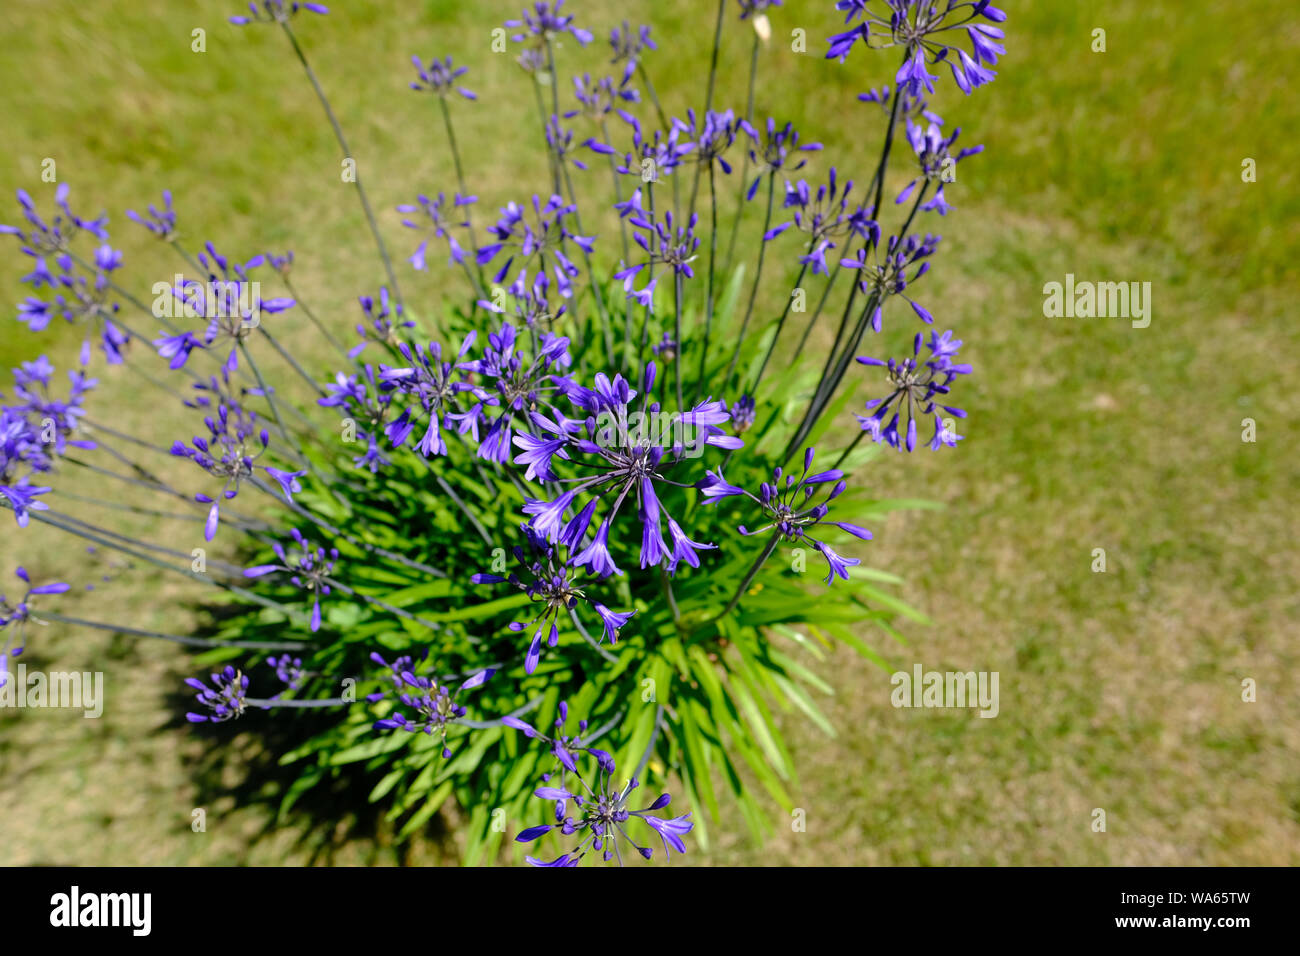 A potted Agapanthus during the height of an English summer in full bloom Stock Photo